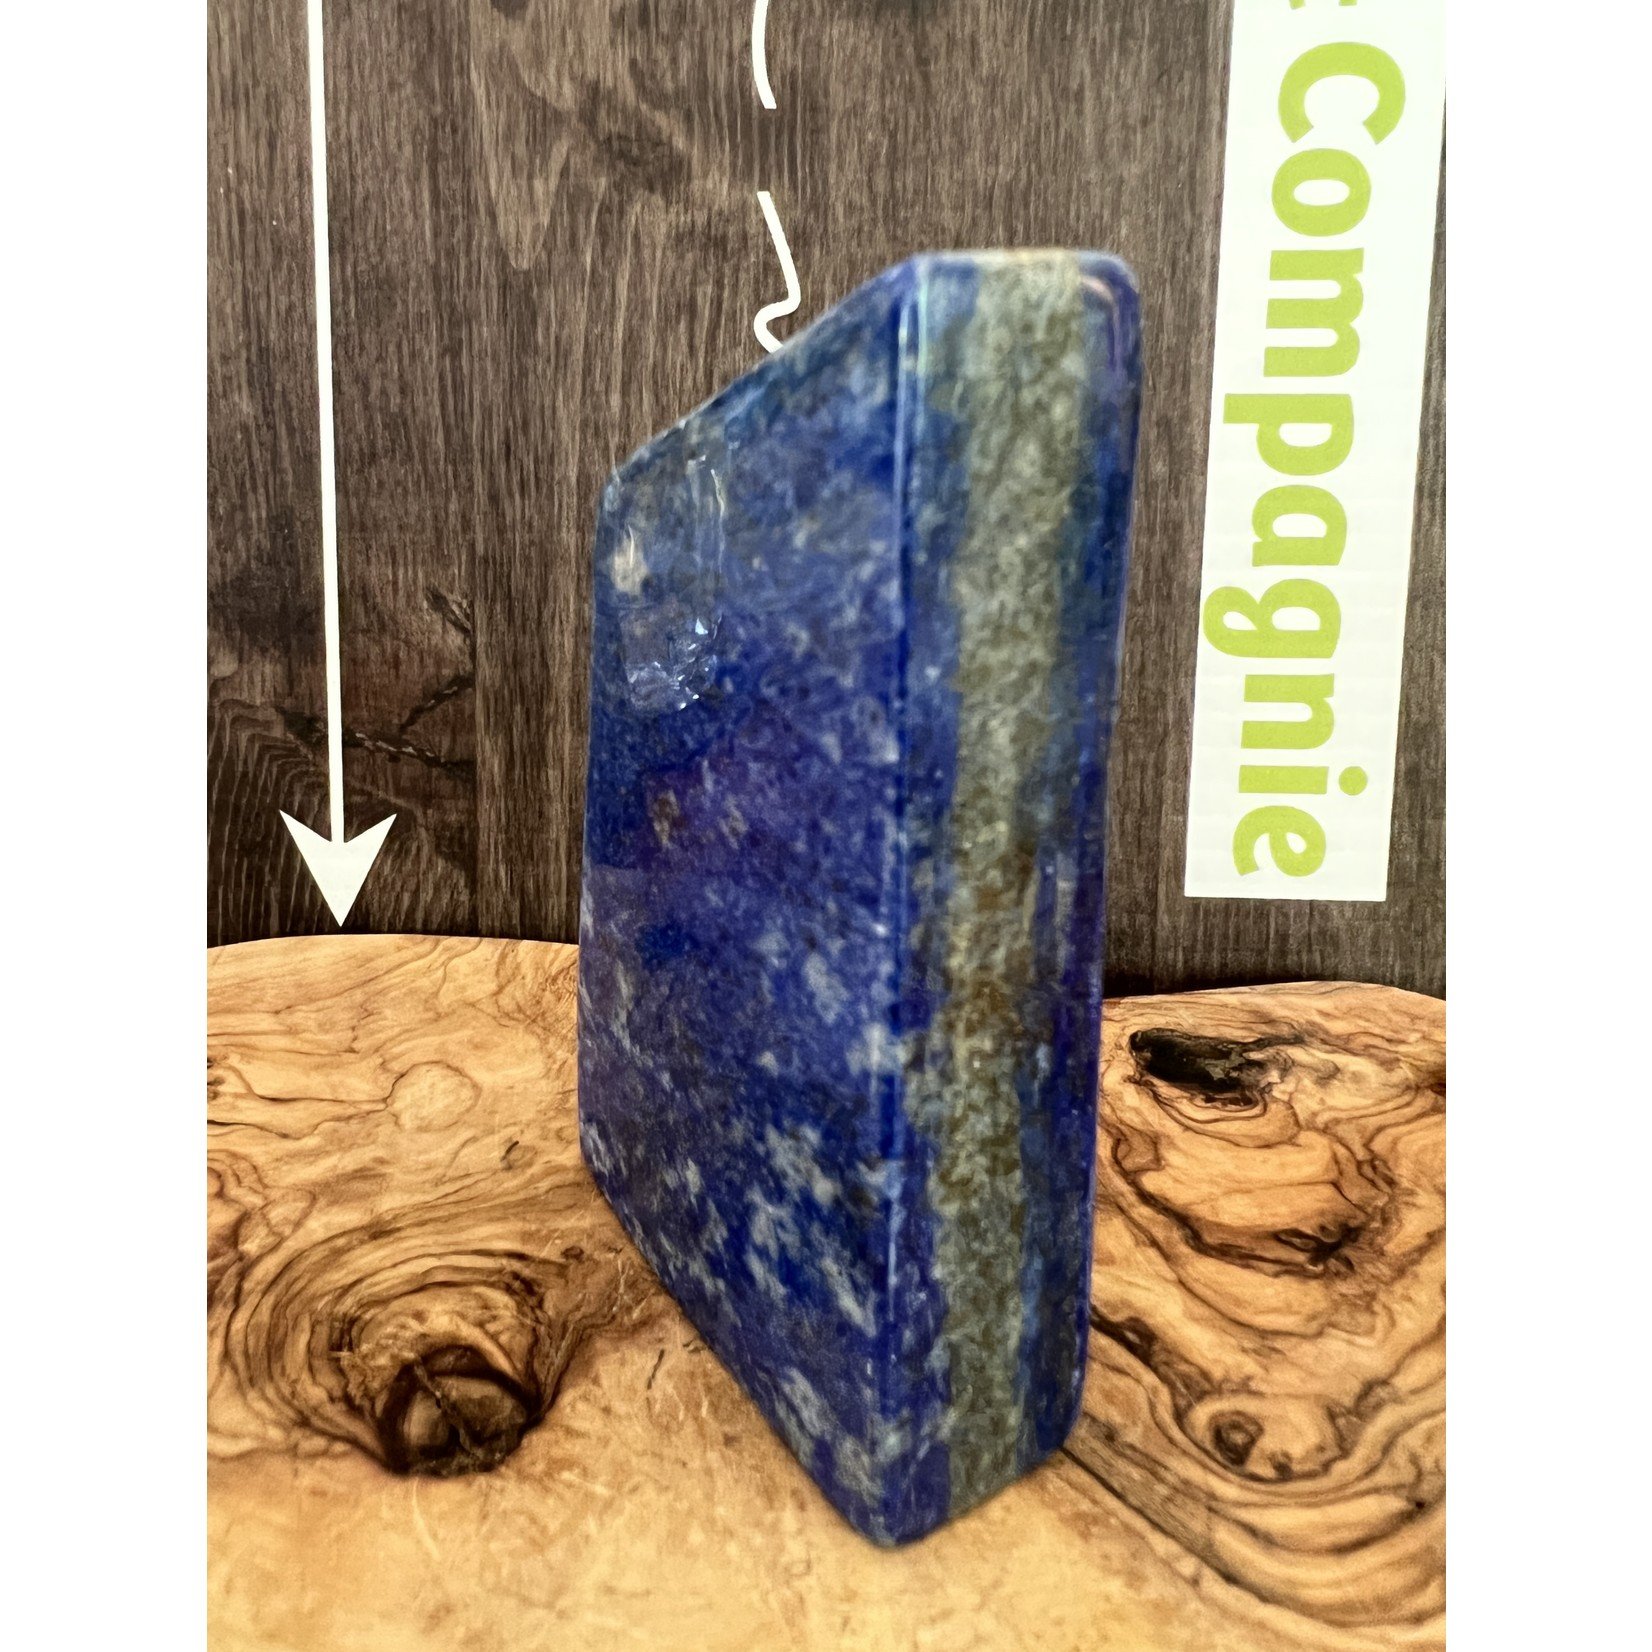 lovely free form lapis lazuli piece, relieves anxieties and eliminates nervousness